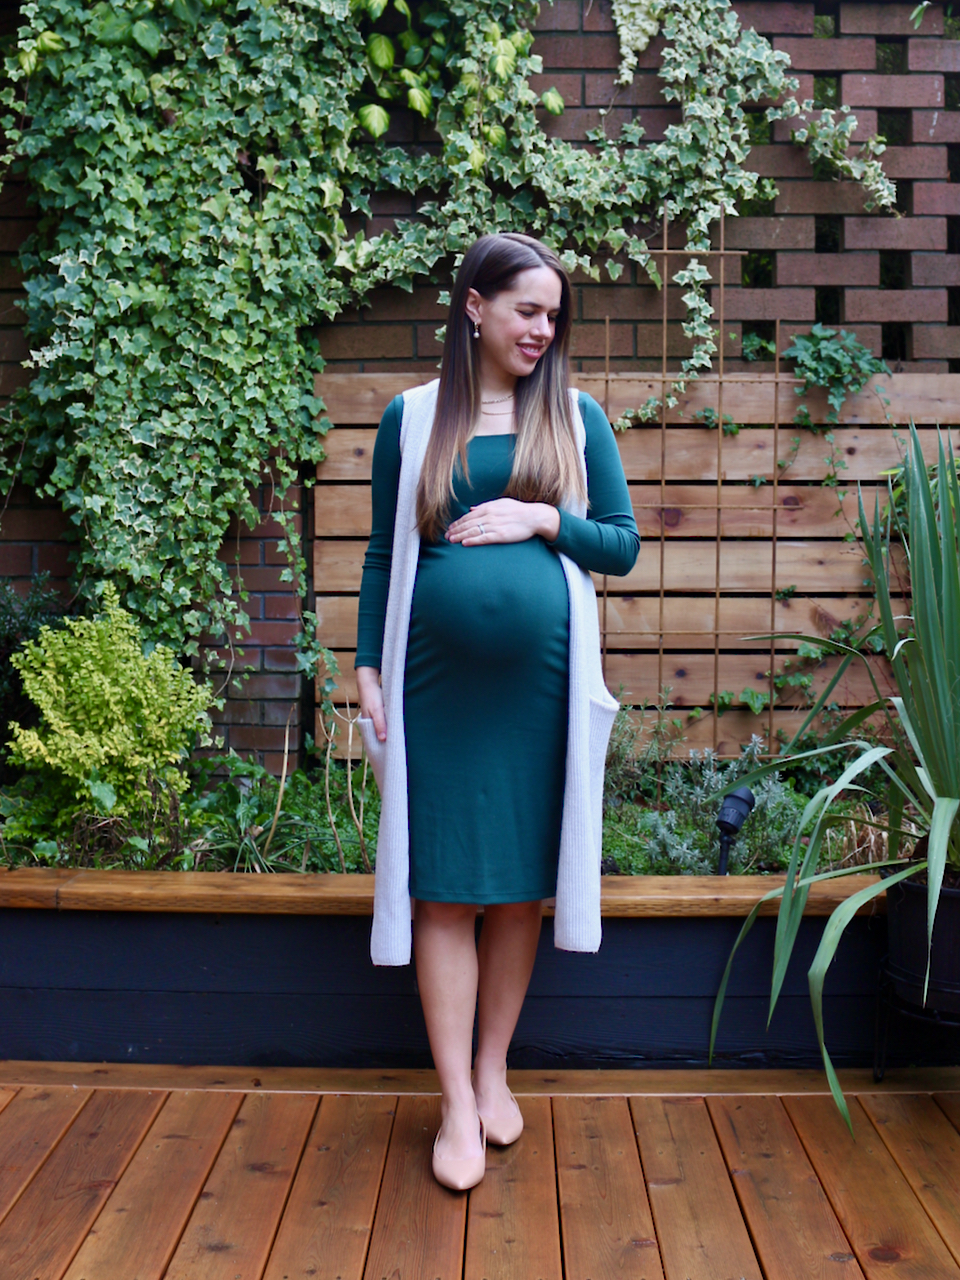 Jules in Flats - Squareneck Ribbed Midi Dress with Duster Vest (Business Casual Workwear on a Budget)